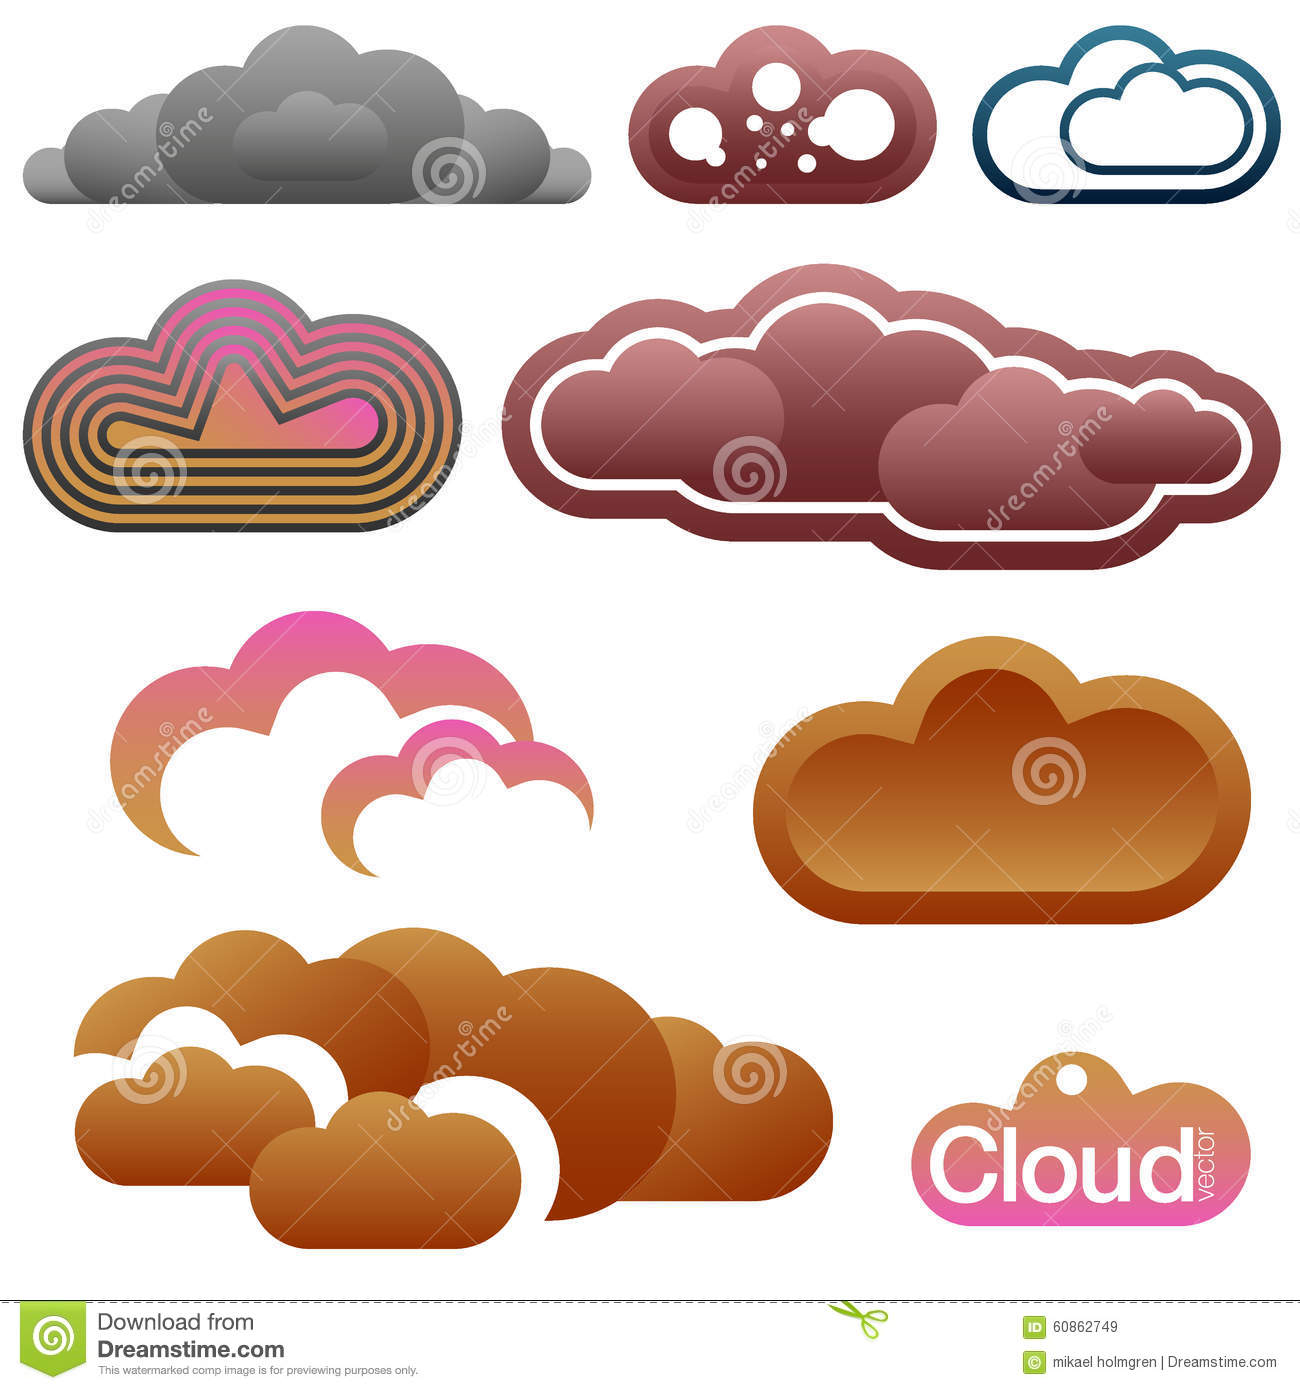 Different Flat Designs Of Clouds 